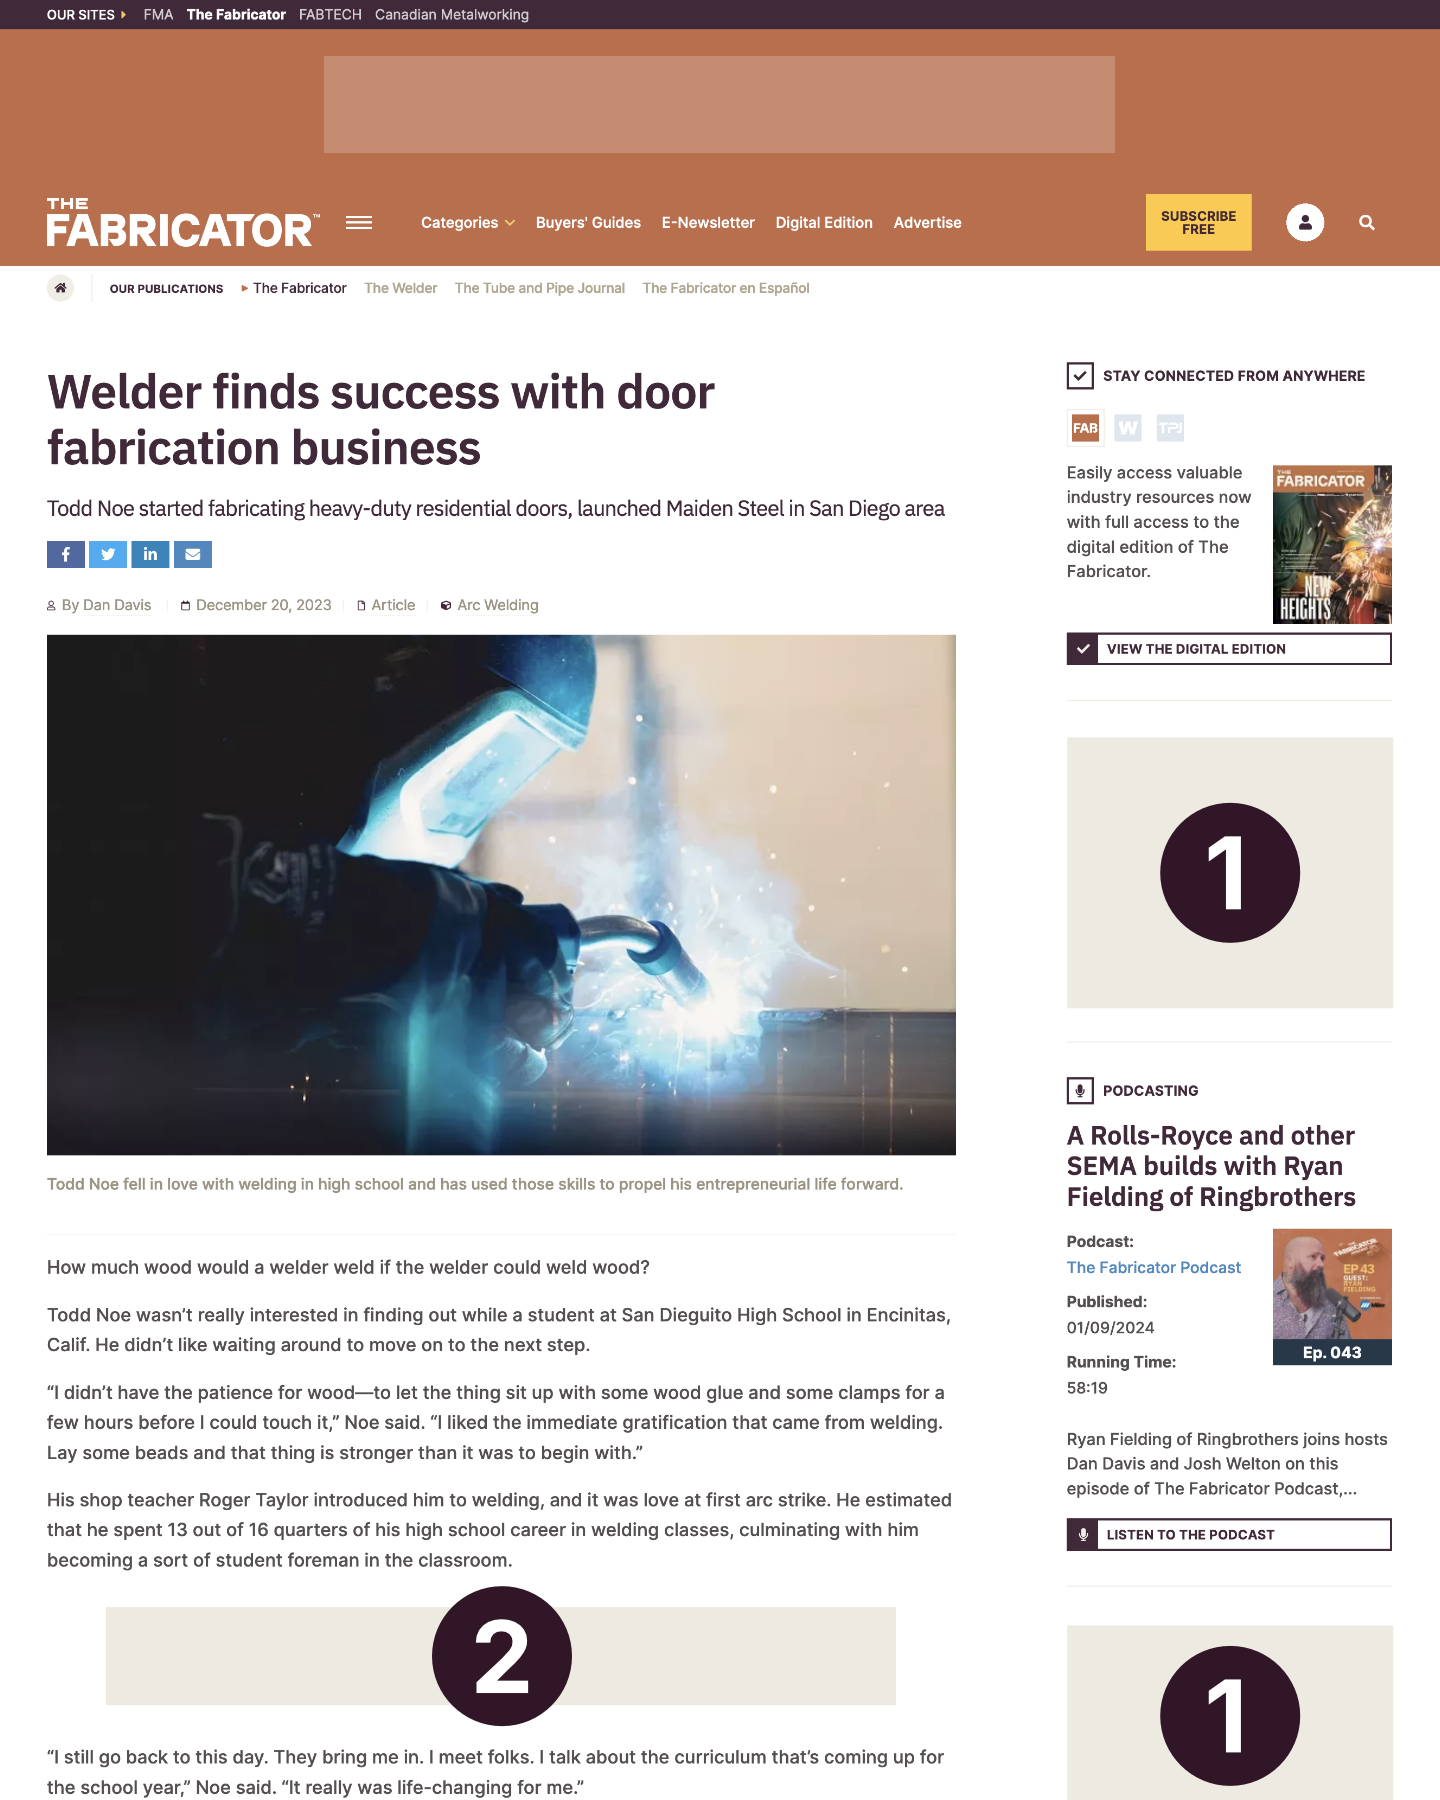 thefabricator.com category page with advertising positions